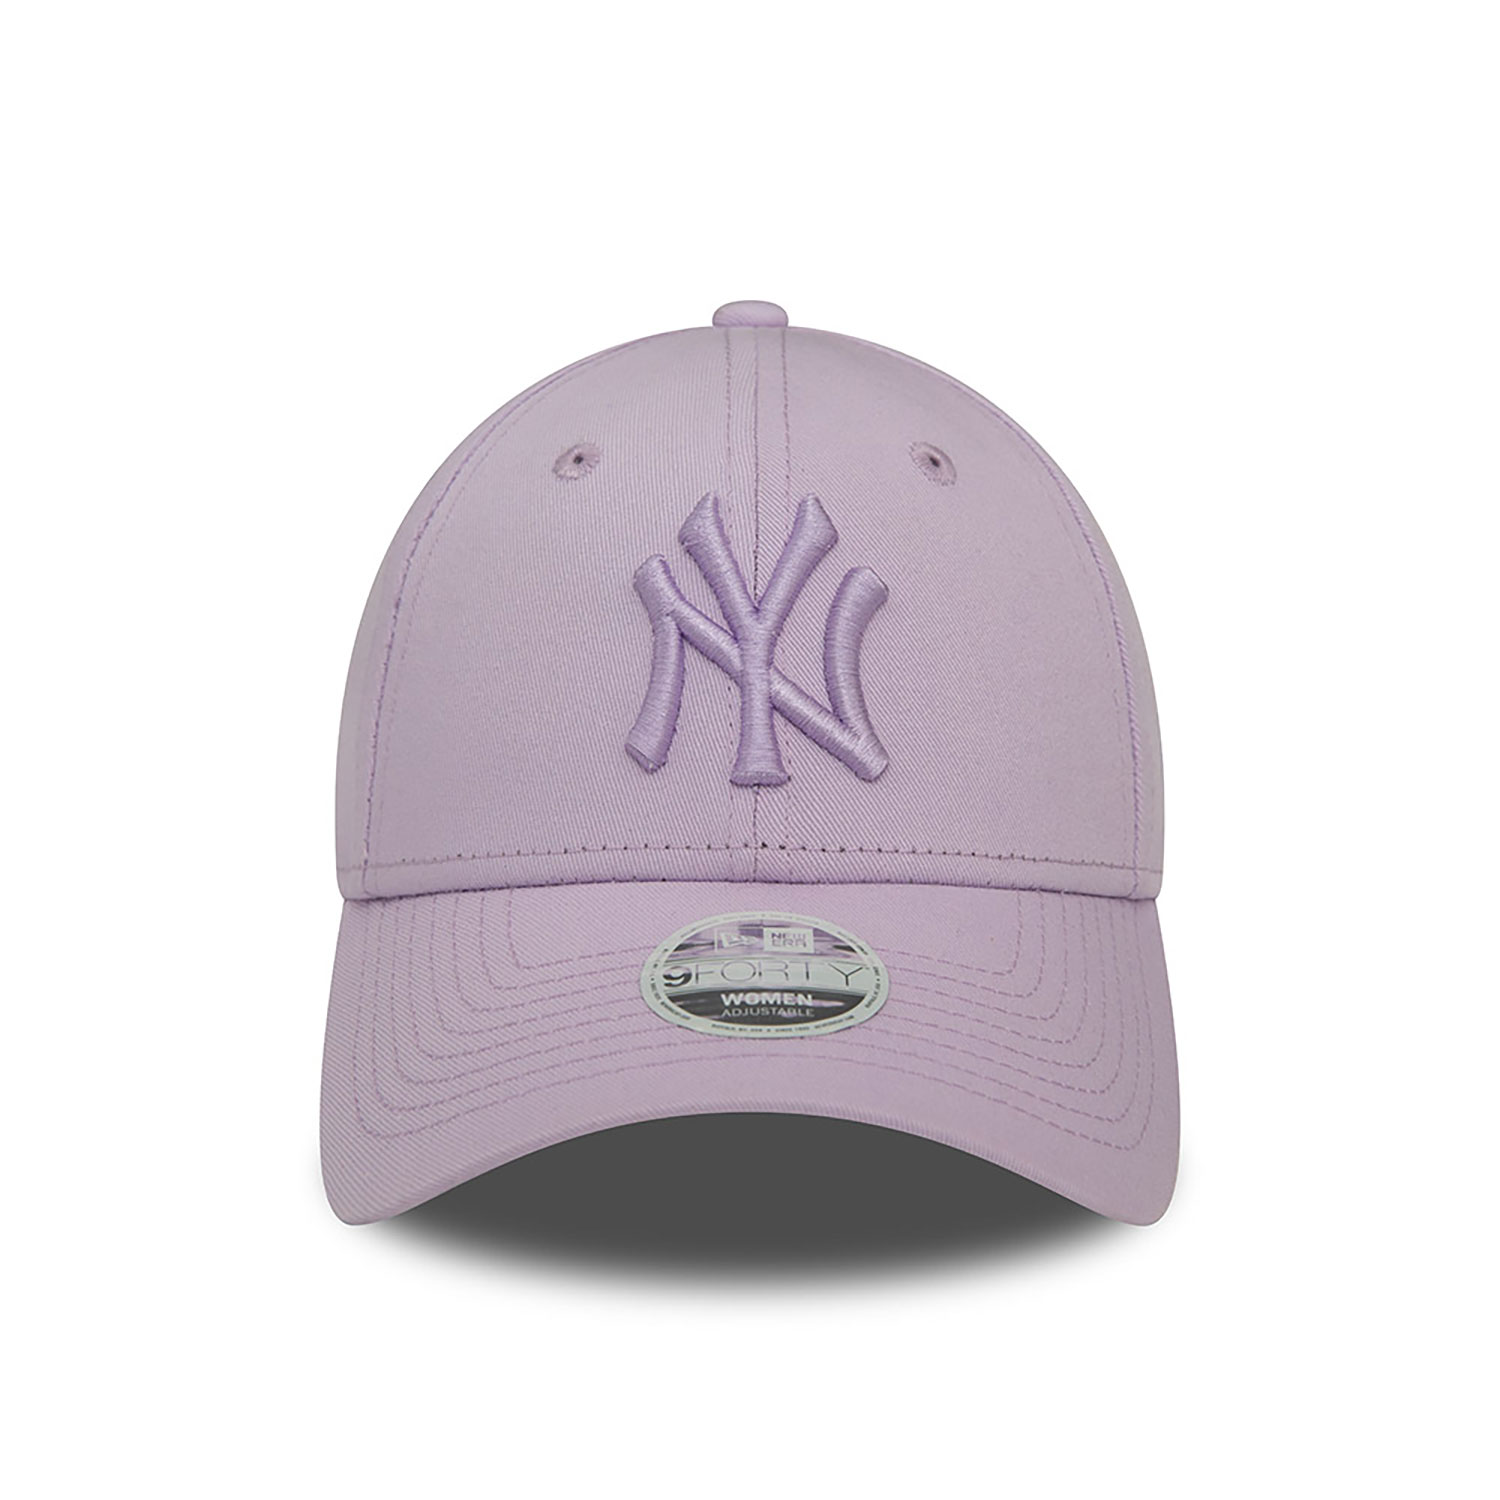 New York Yankees Womens League Essential Lilac 9FORTY Adjustable Cap